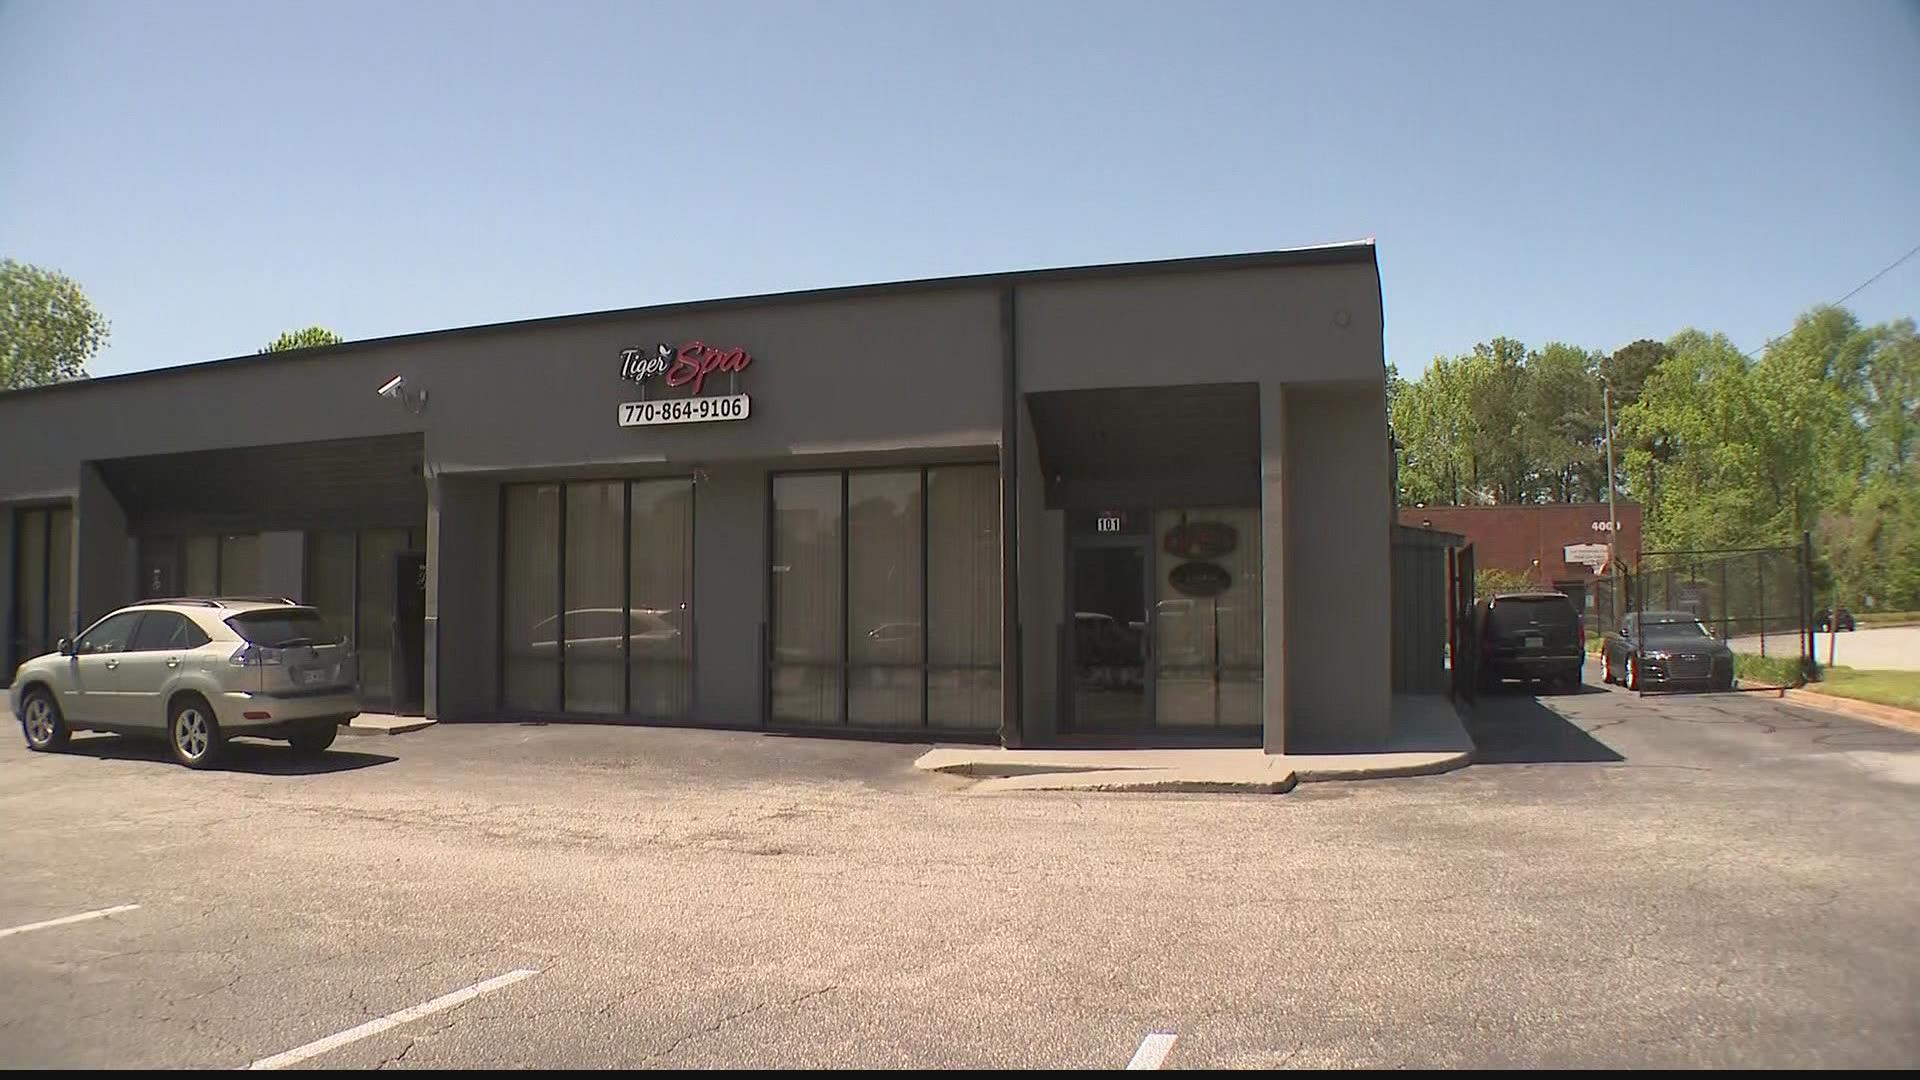 A massage spa in DeKalb County remains closed after a person is arrested and accused of selling sex.